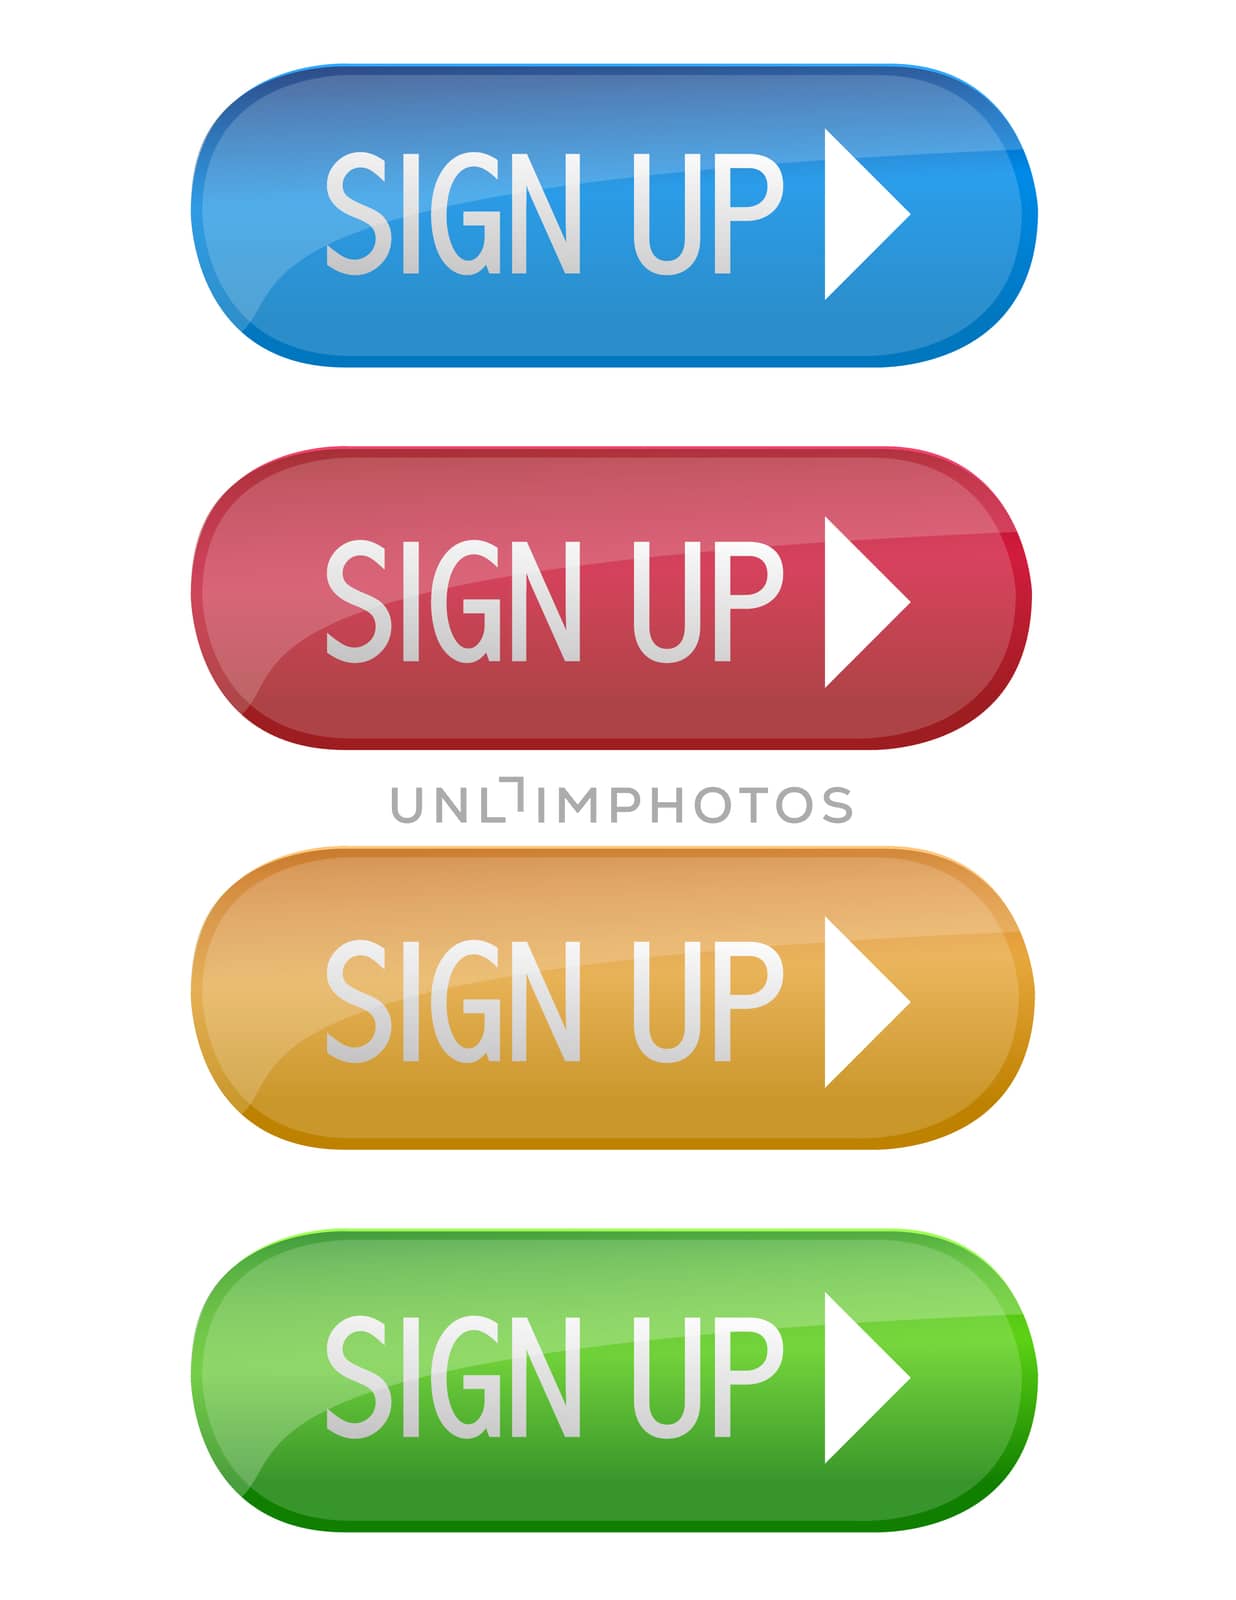 Sign up by alexmillos